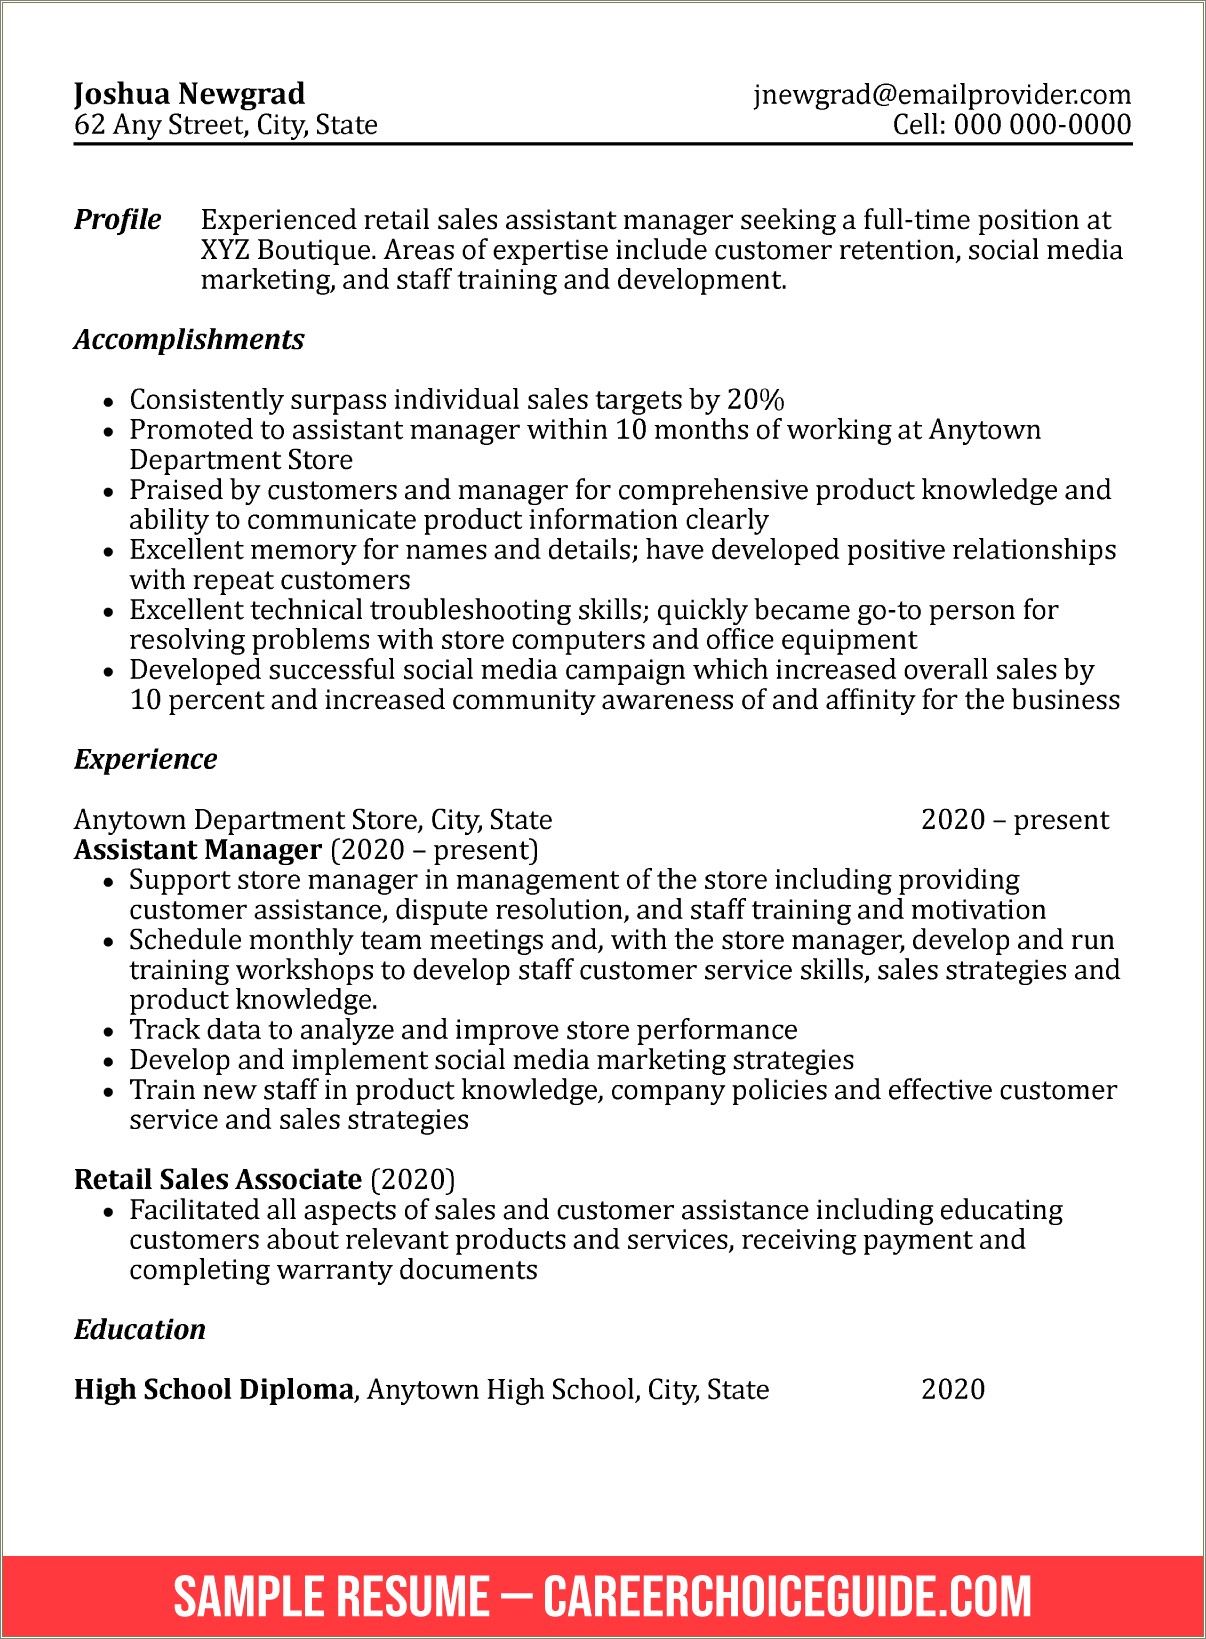 Format Examples For High School Resumes